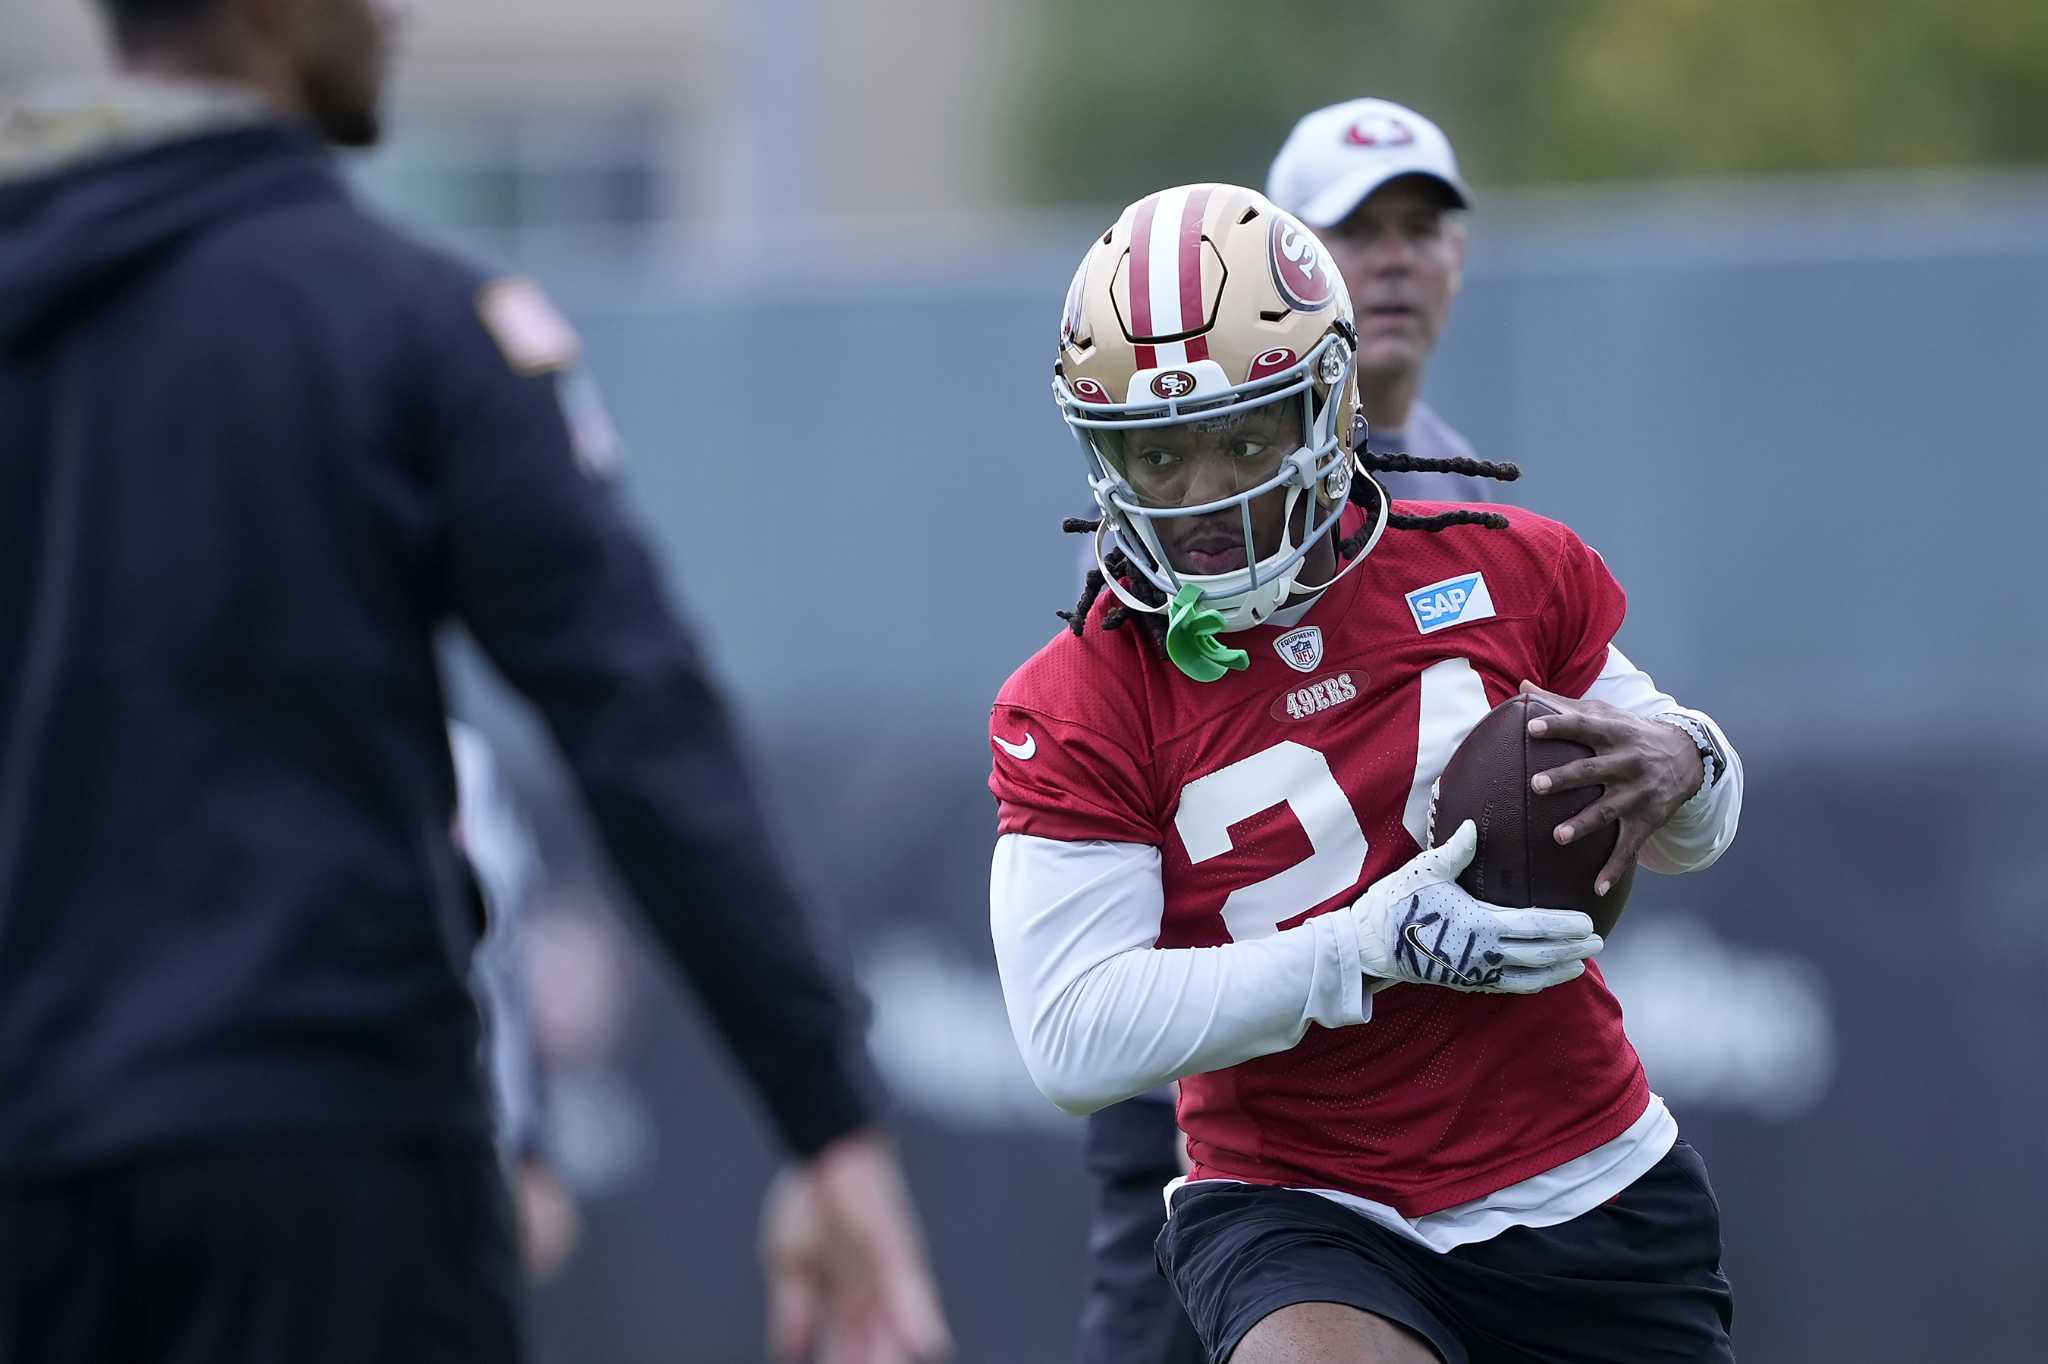 After nearly quitting in college, 49ers' Jordan Mason eyes bigger role